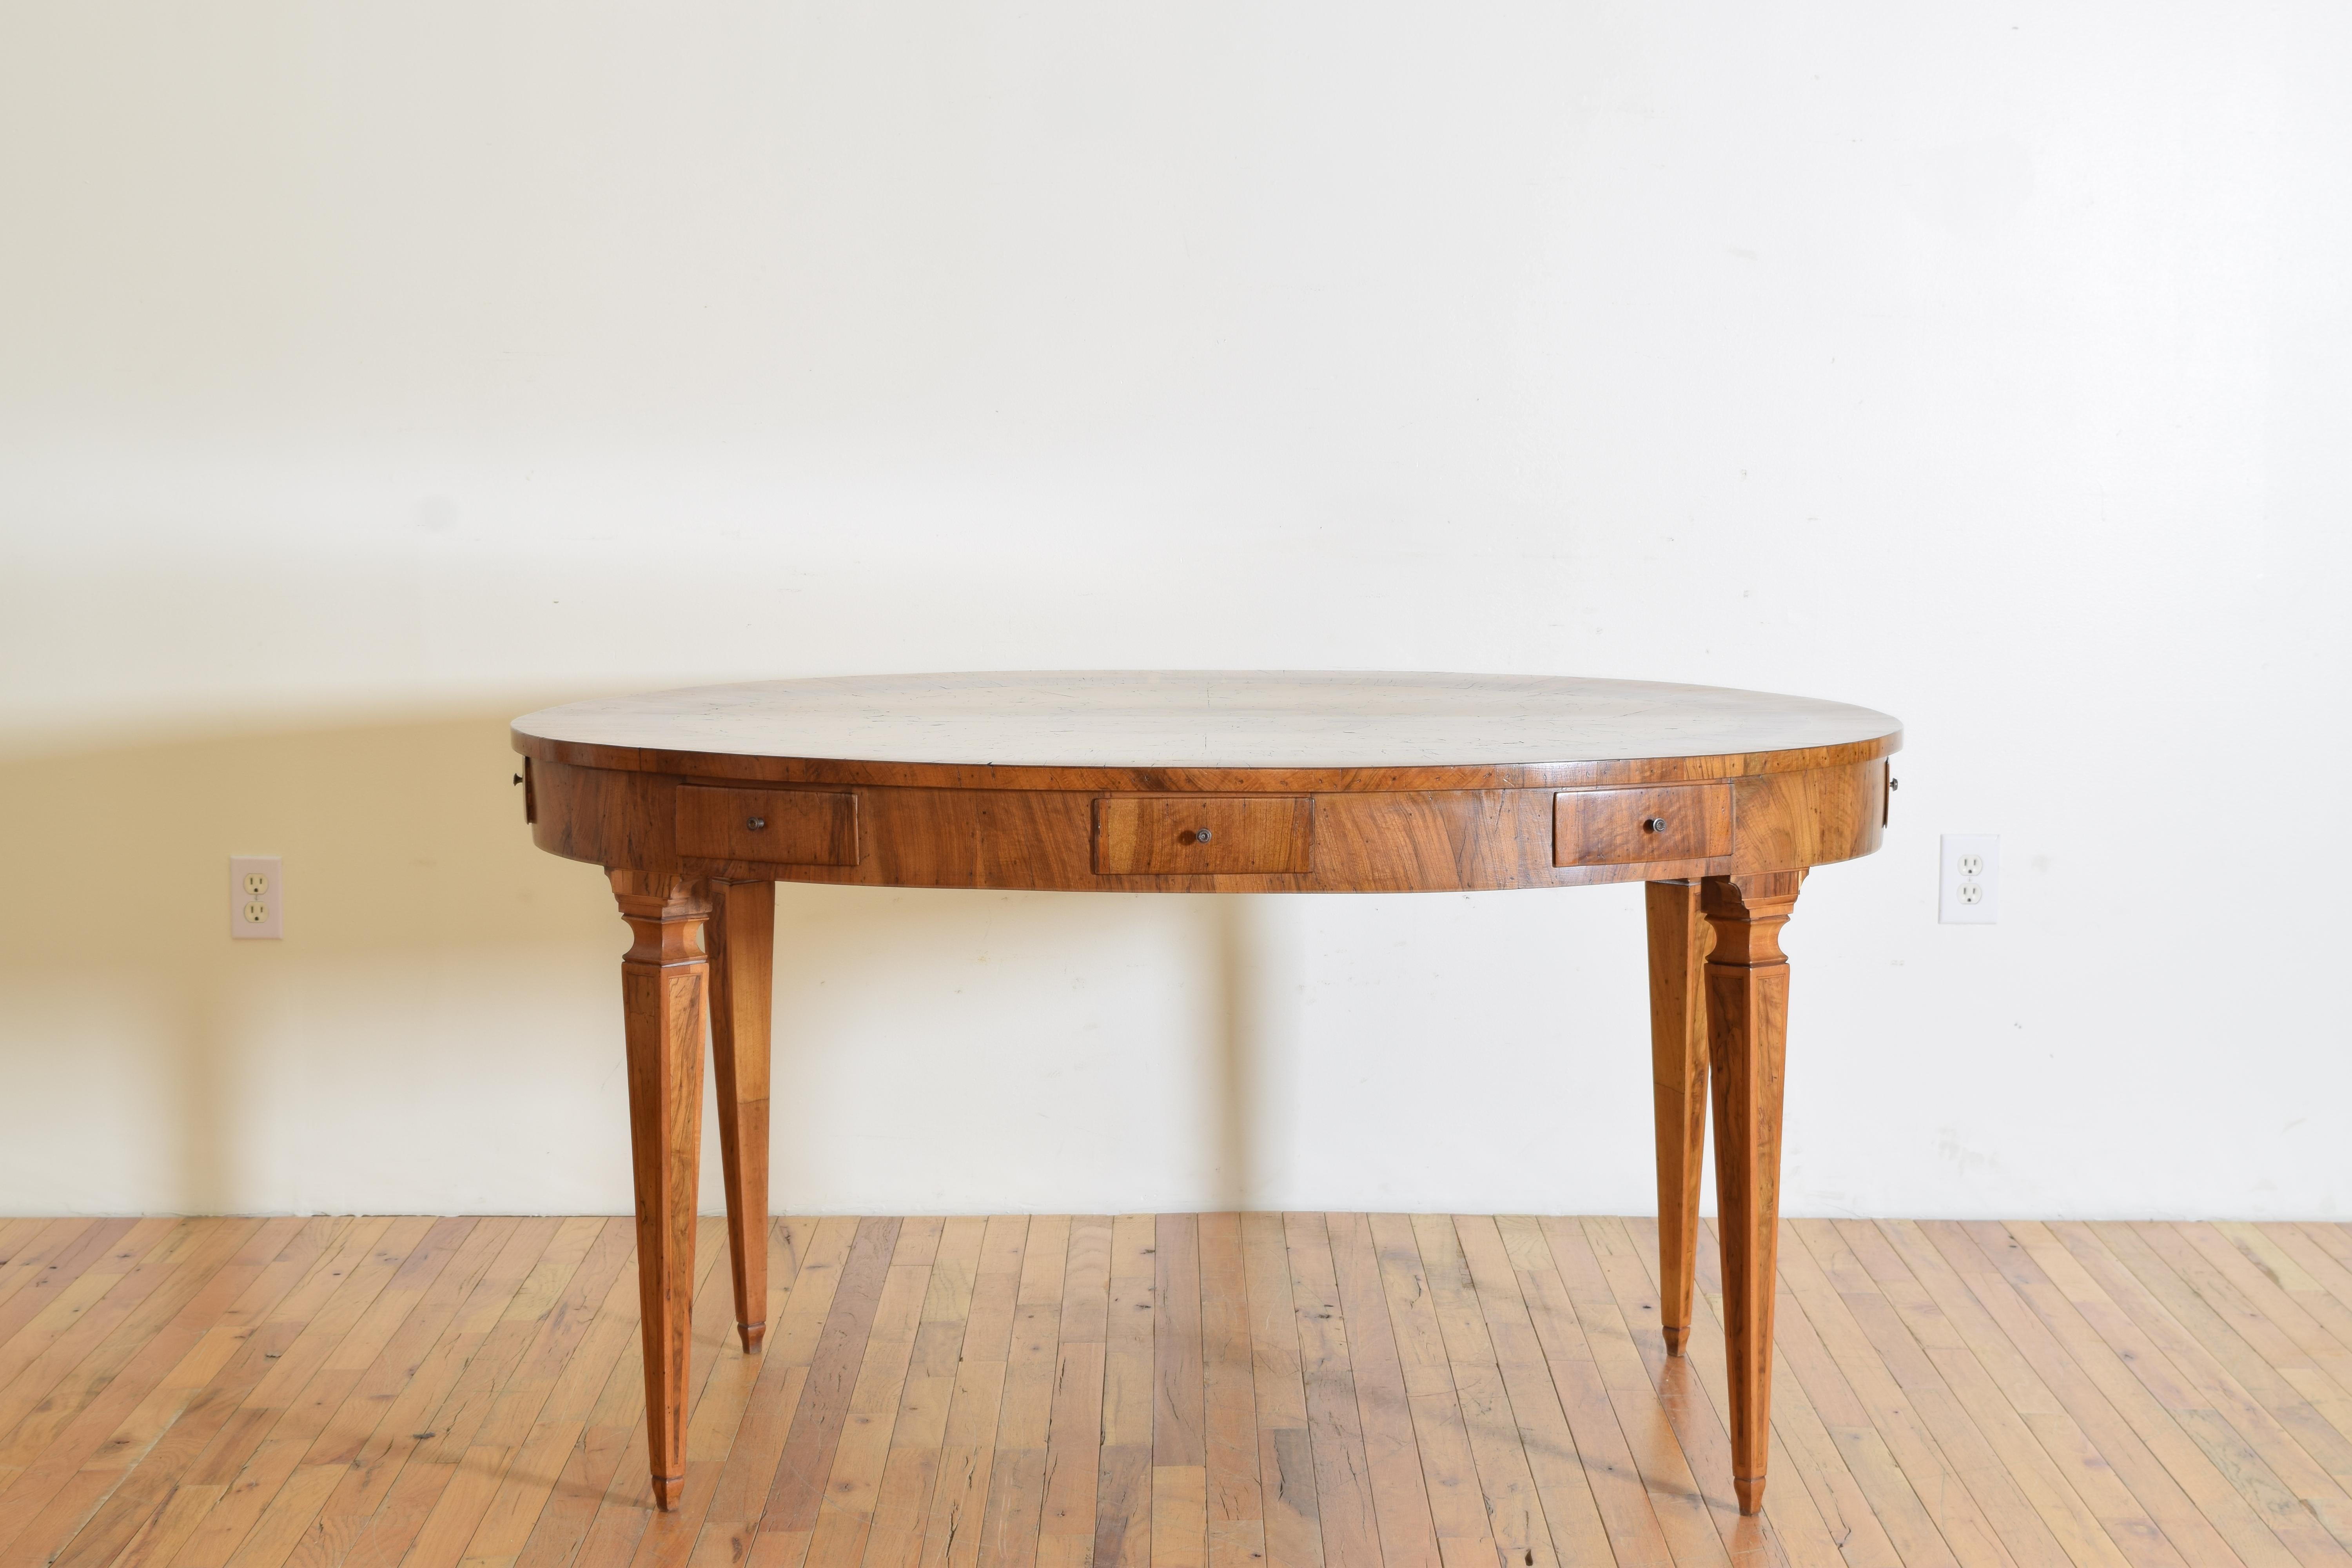 Rare and unique table, oval shaped and covered completely in walnut, fruitwood, and burl walnut veneers with an outer edge of straight walnut veneers, four book matched large burl wood panels, and a centered scroll pattern of fruitwood, the top